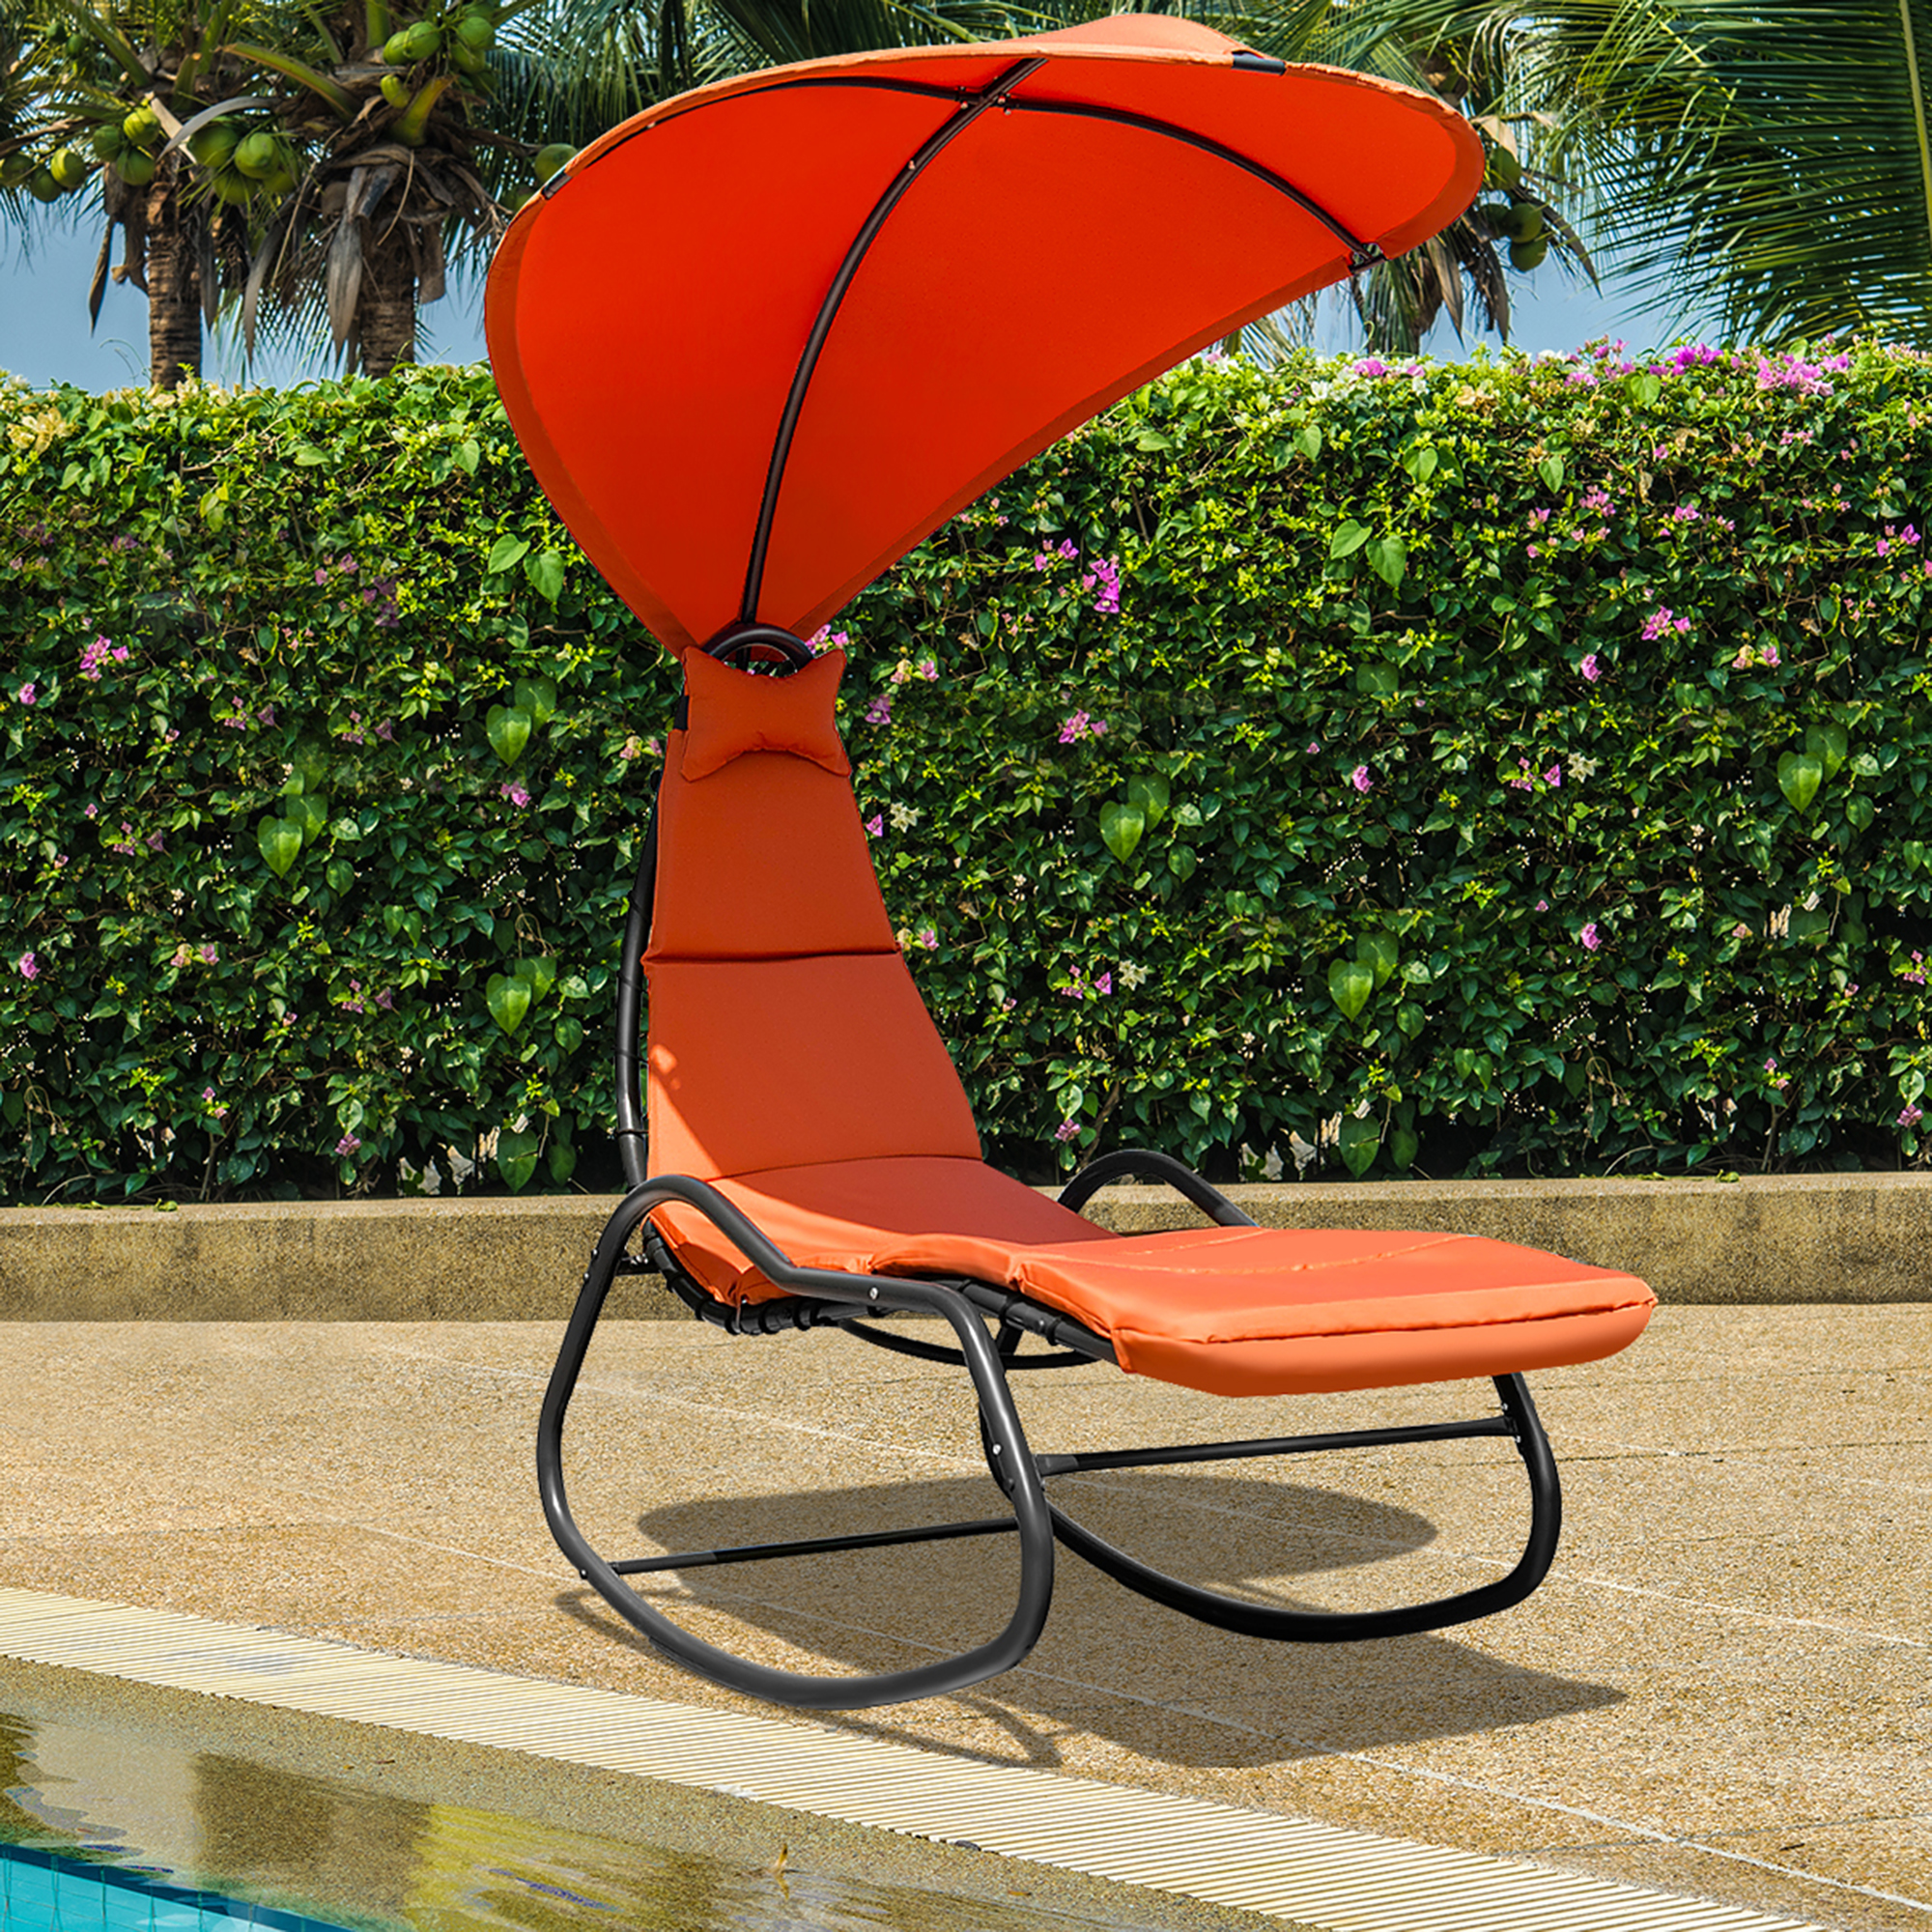 Gymax Patio Lounge Chair Chaise Garden w/ Steel Frame Cushion Canopy Orange - image 1 of 10